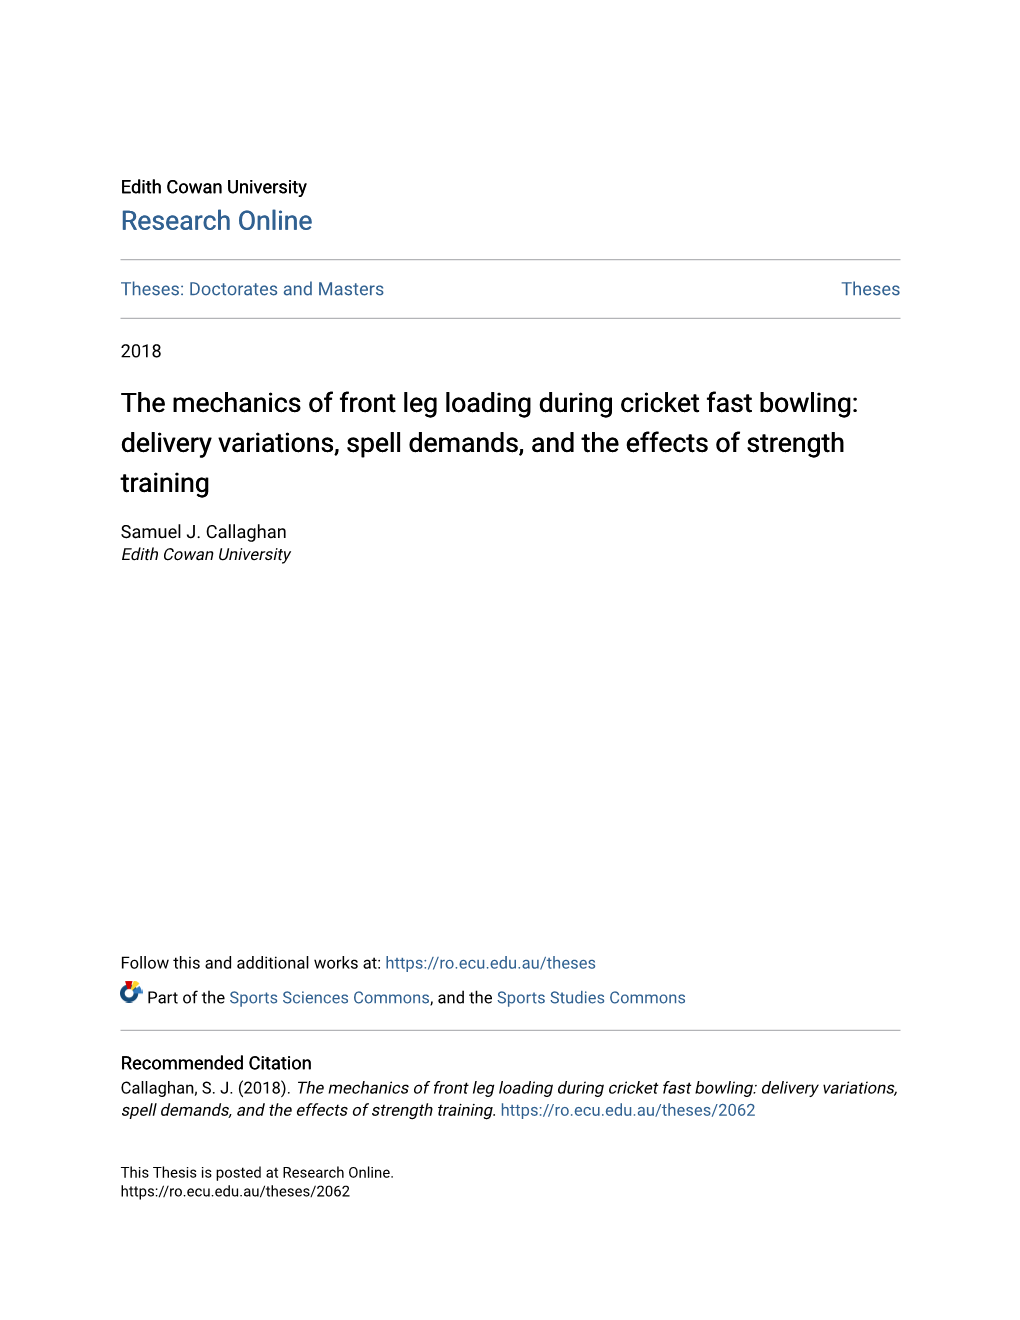 The Mechanics of Front Leg Loading During Cricket Fast Bowling: Delivery Variations, Spell Demands, and the Effects of Strength Training